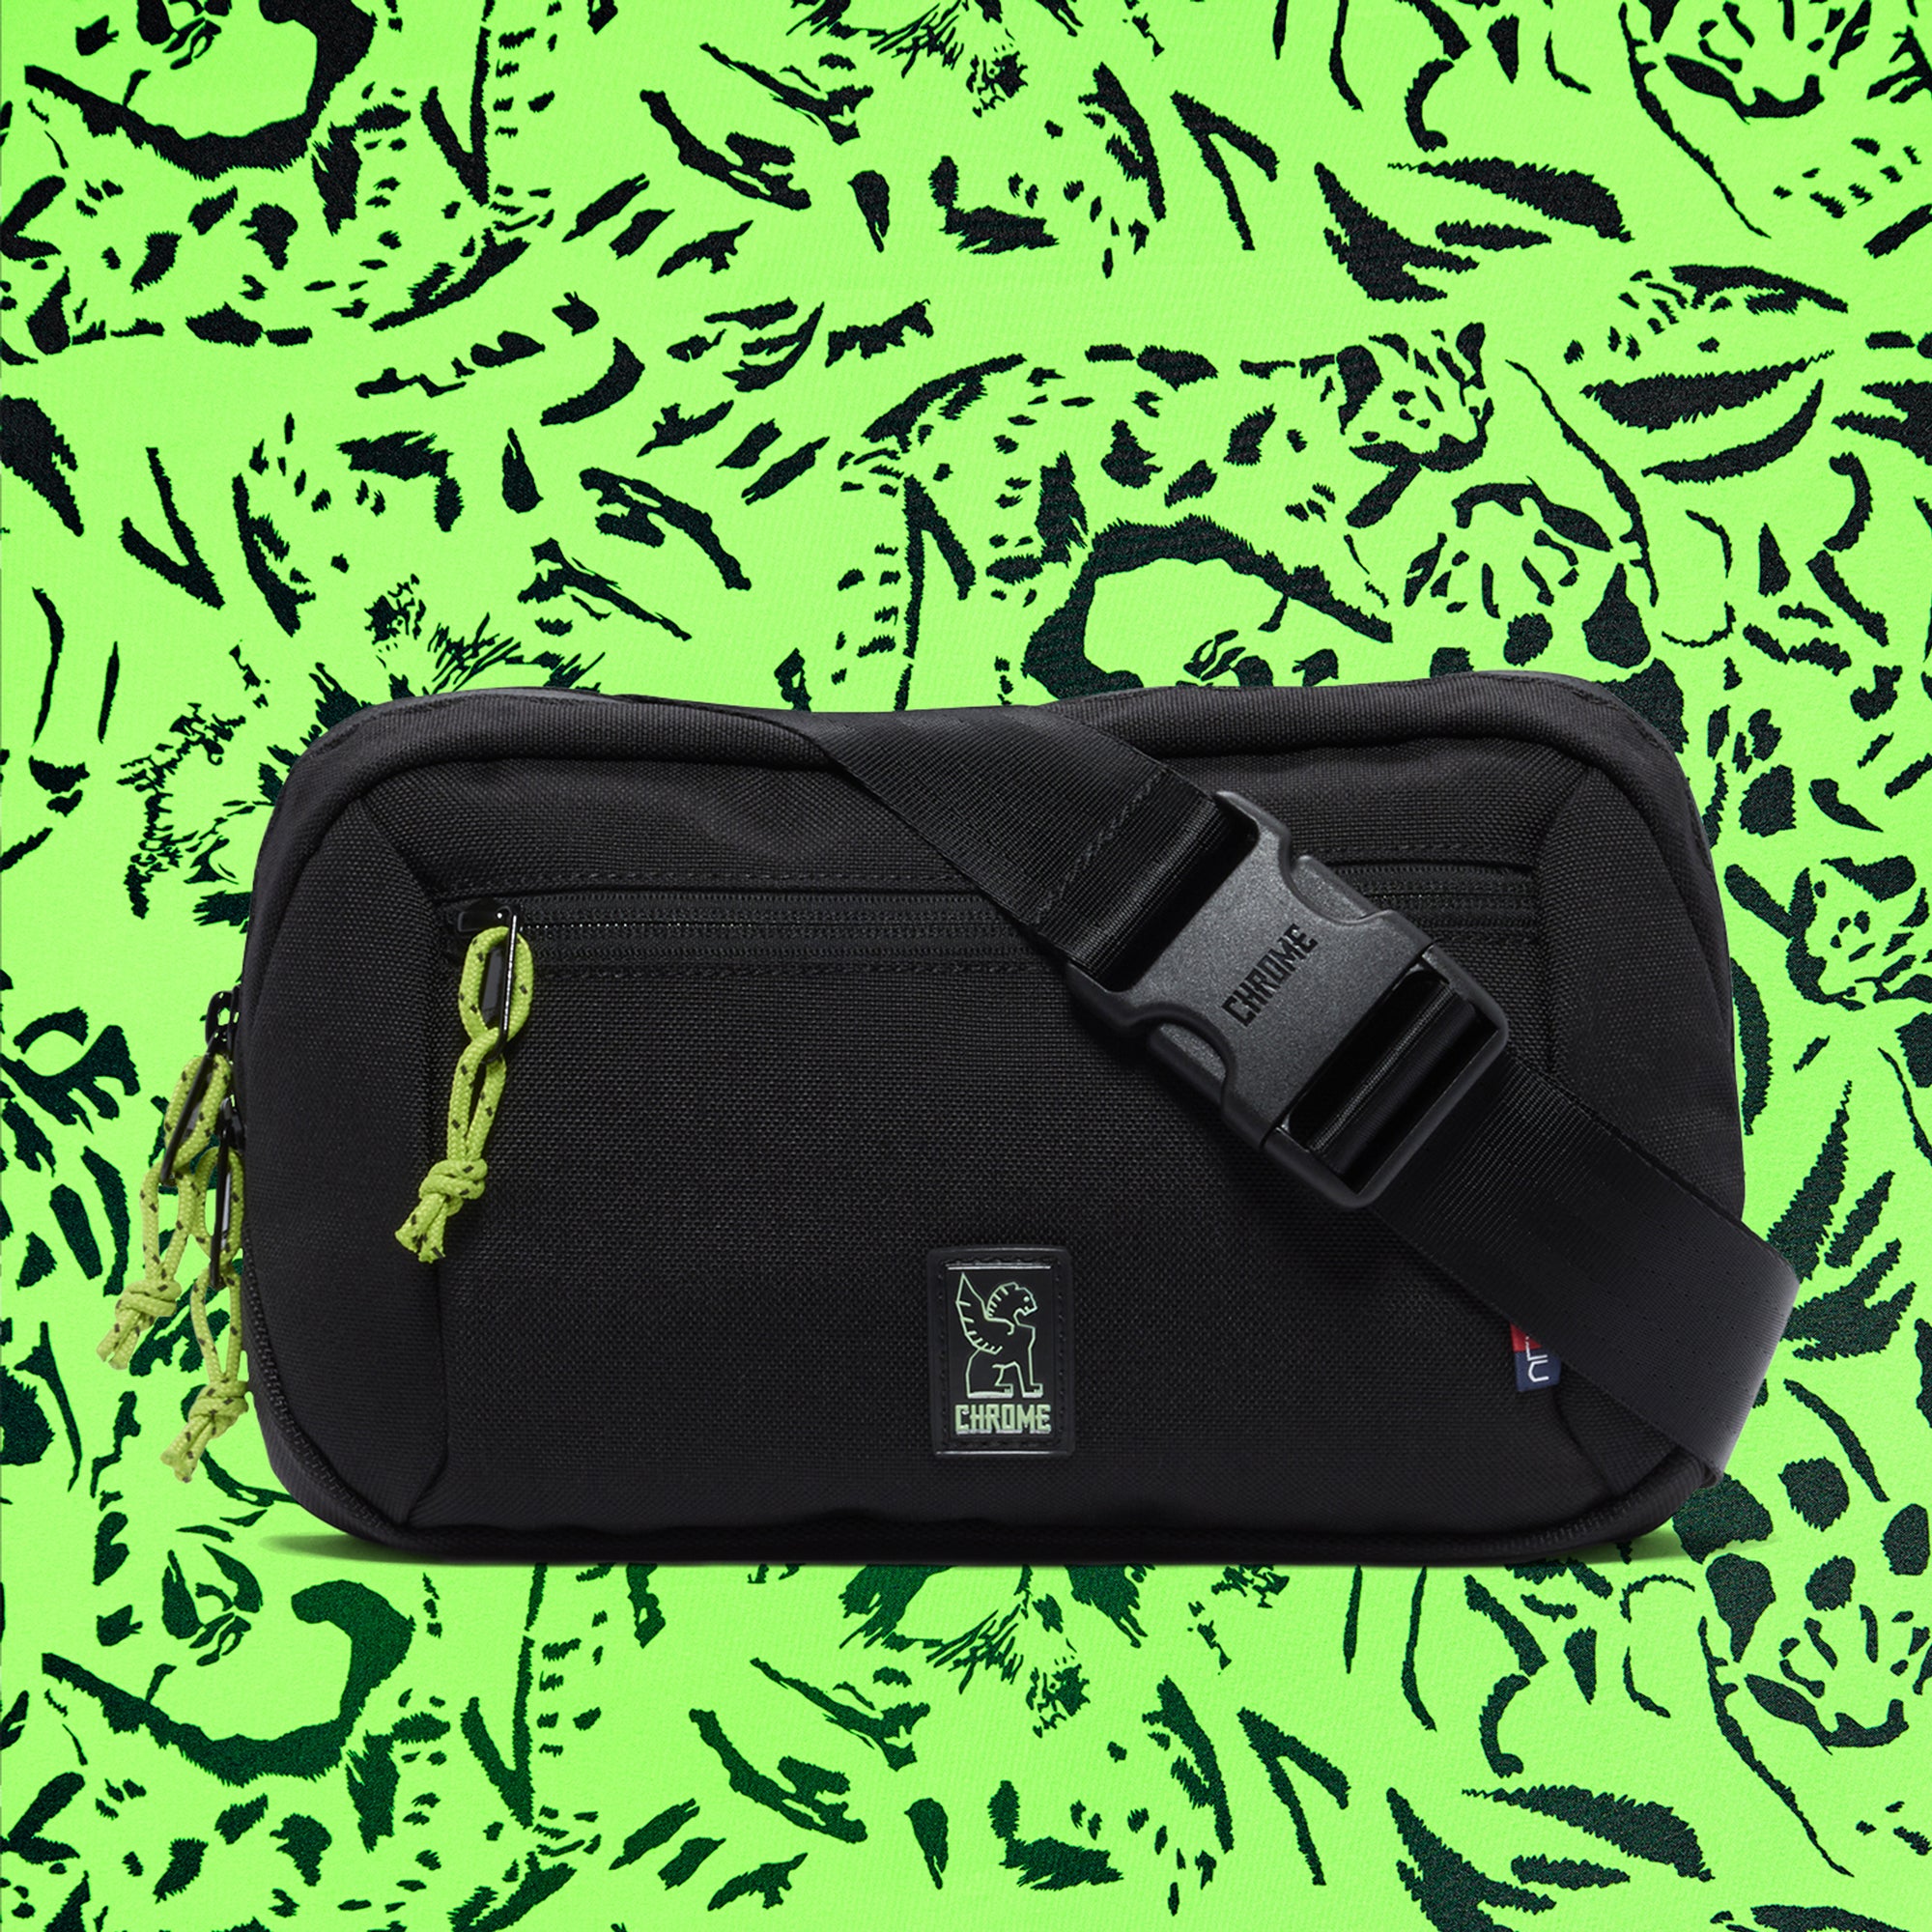 Ziptop waistpack collab with ALC with the fabric inside the green bag #color_black / alc green